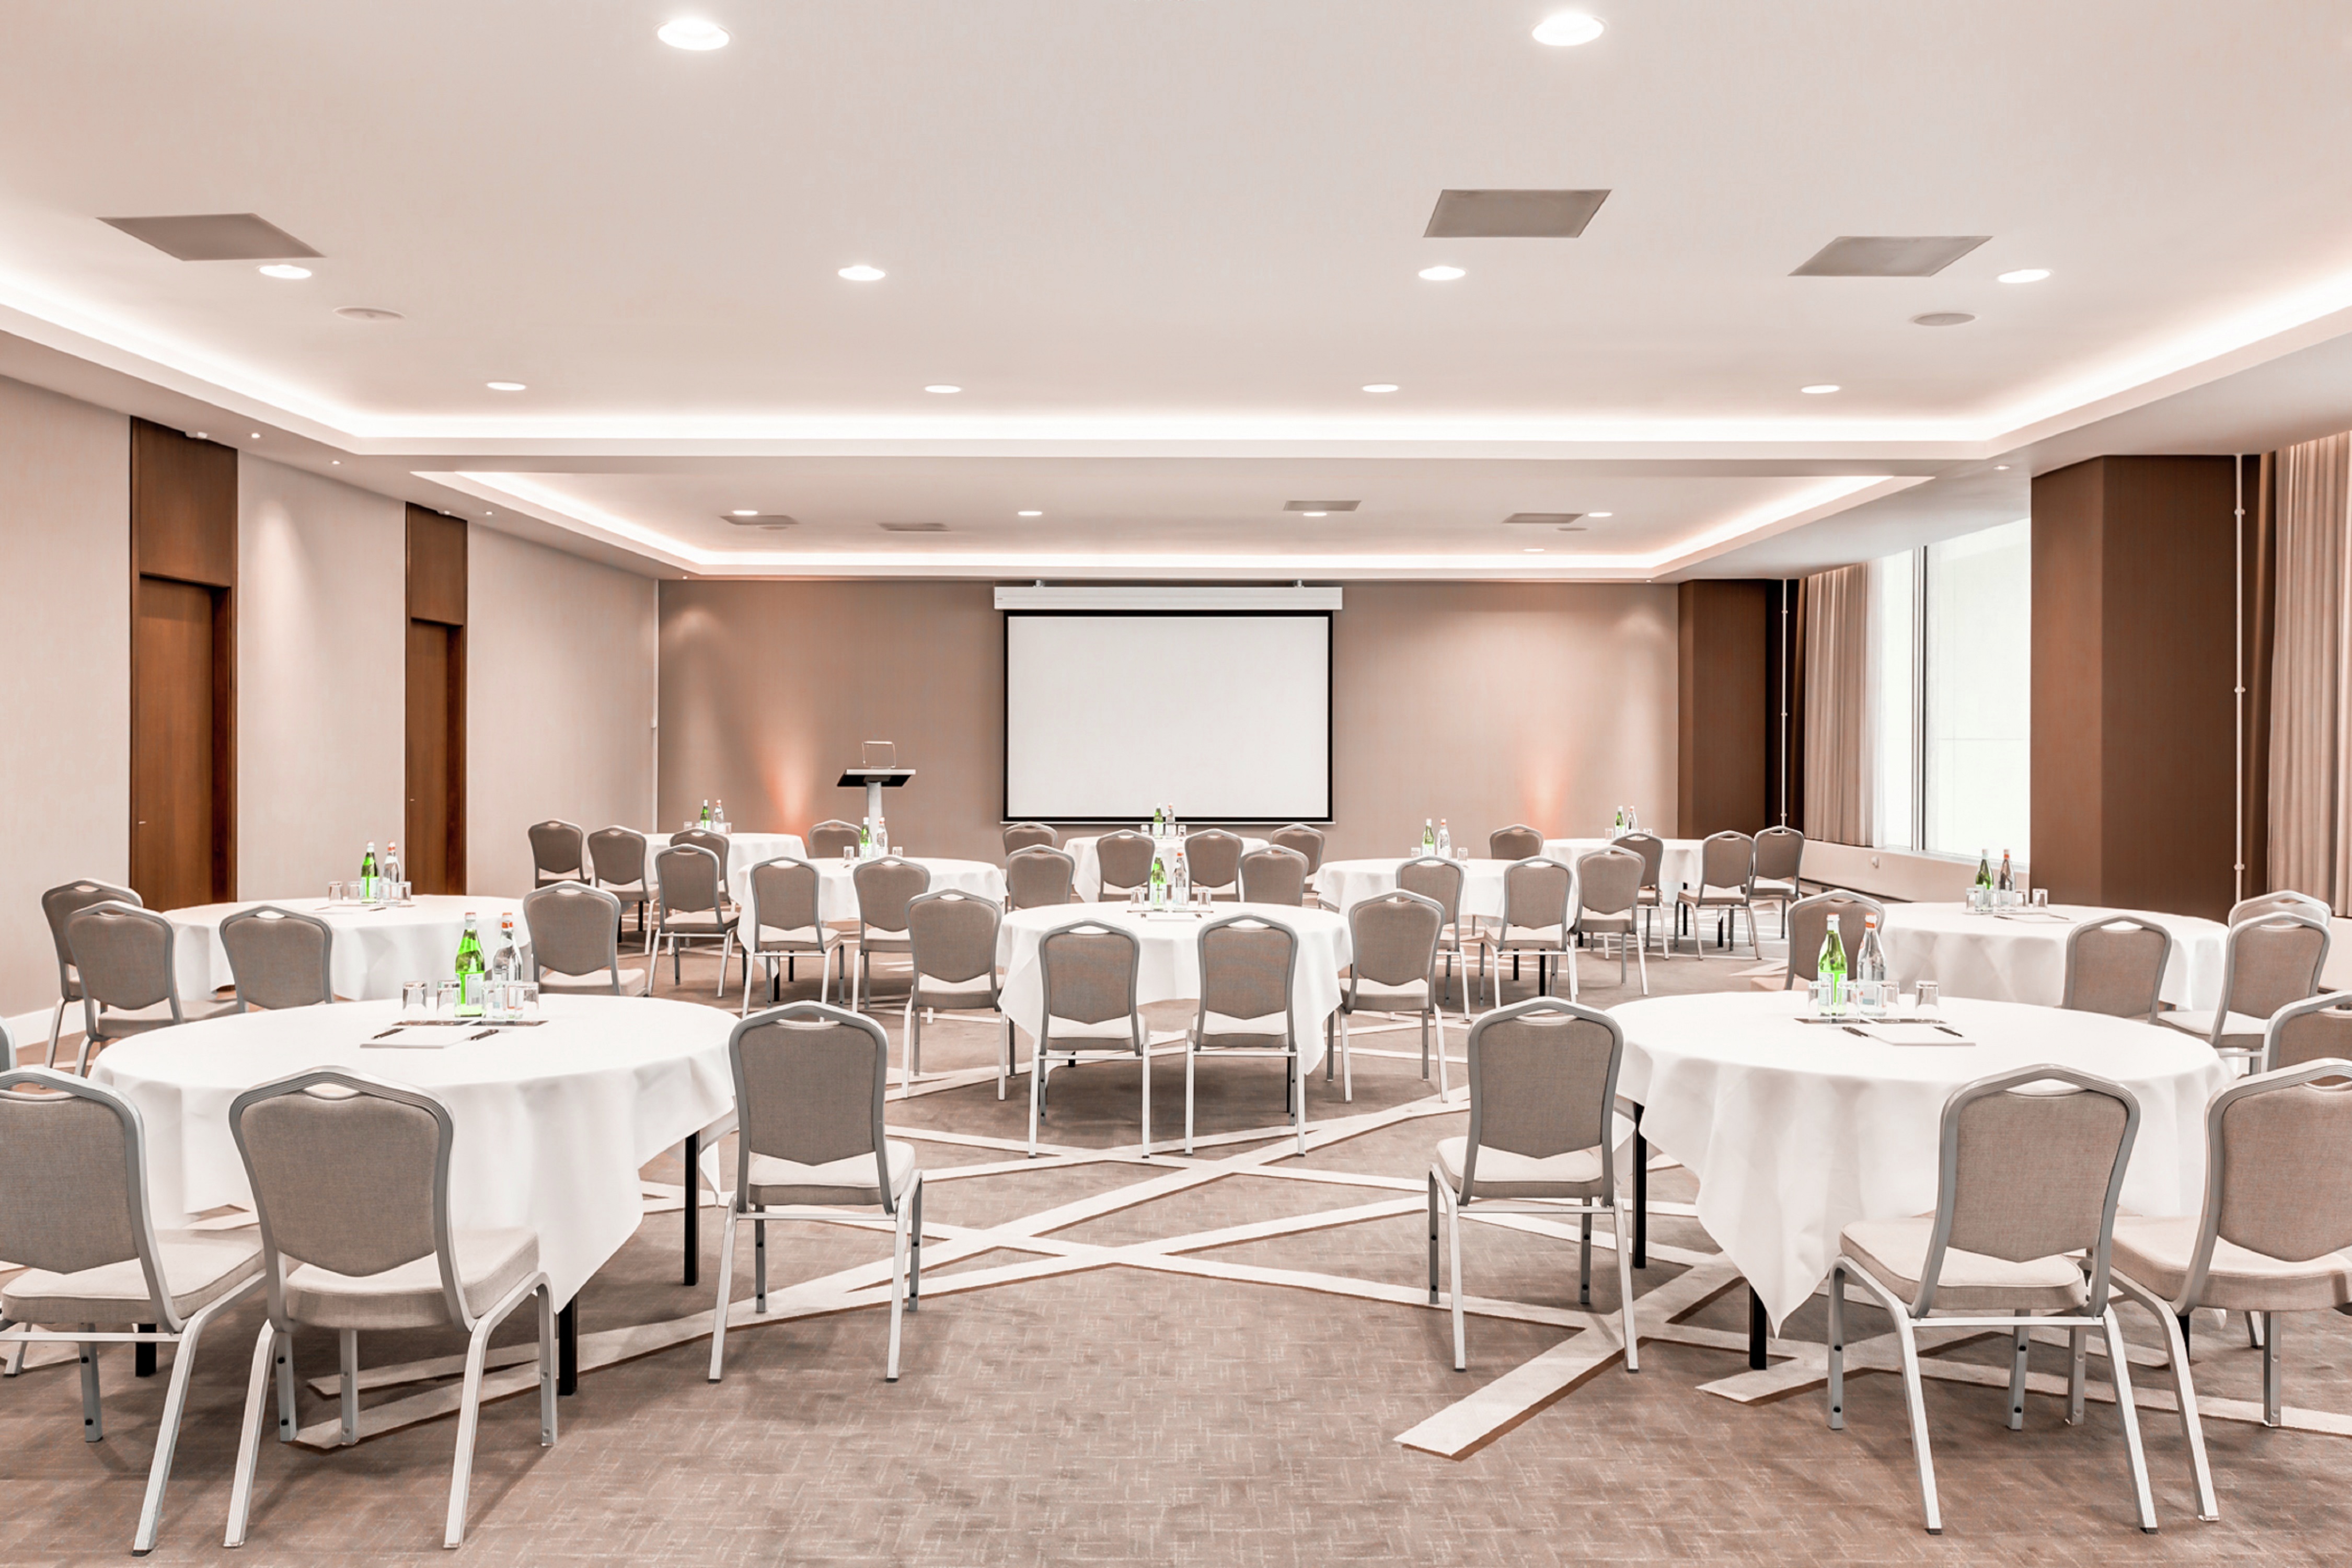 Meeting Room Setup with Round Tables and a Projection Screen